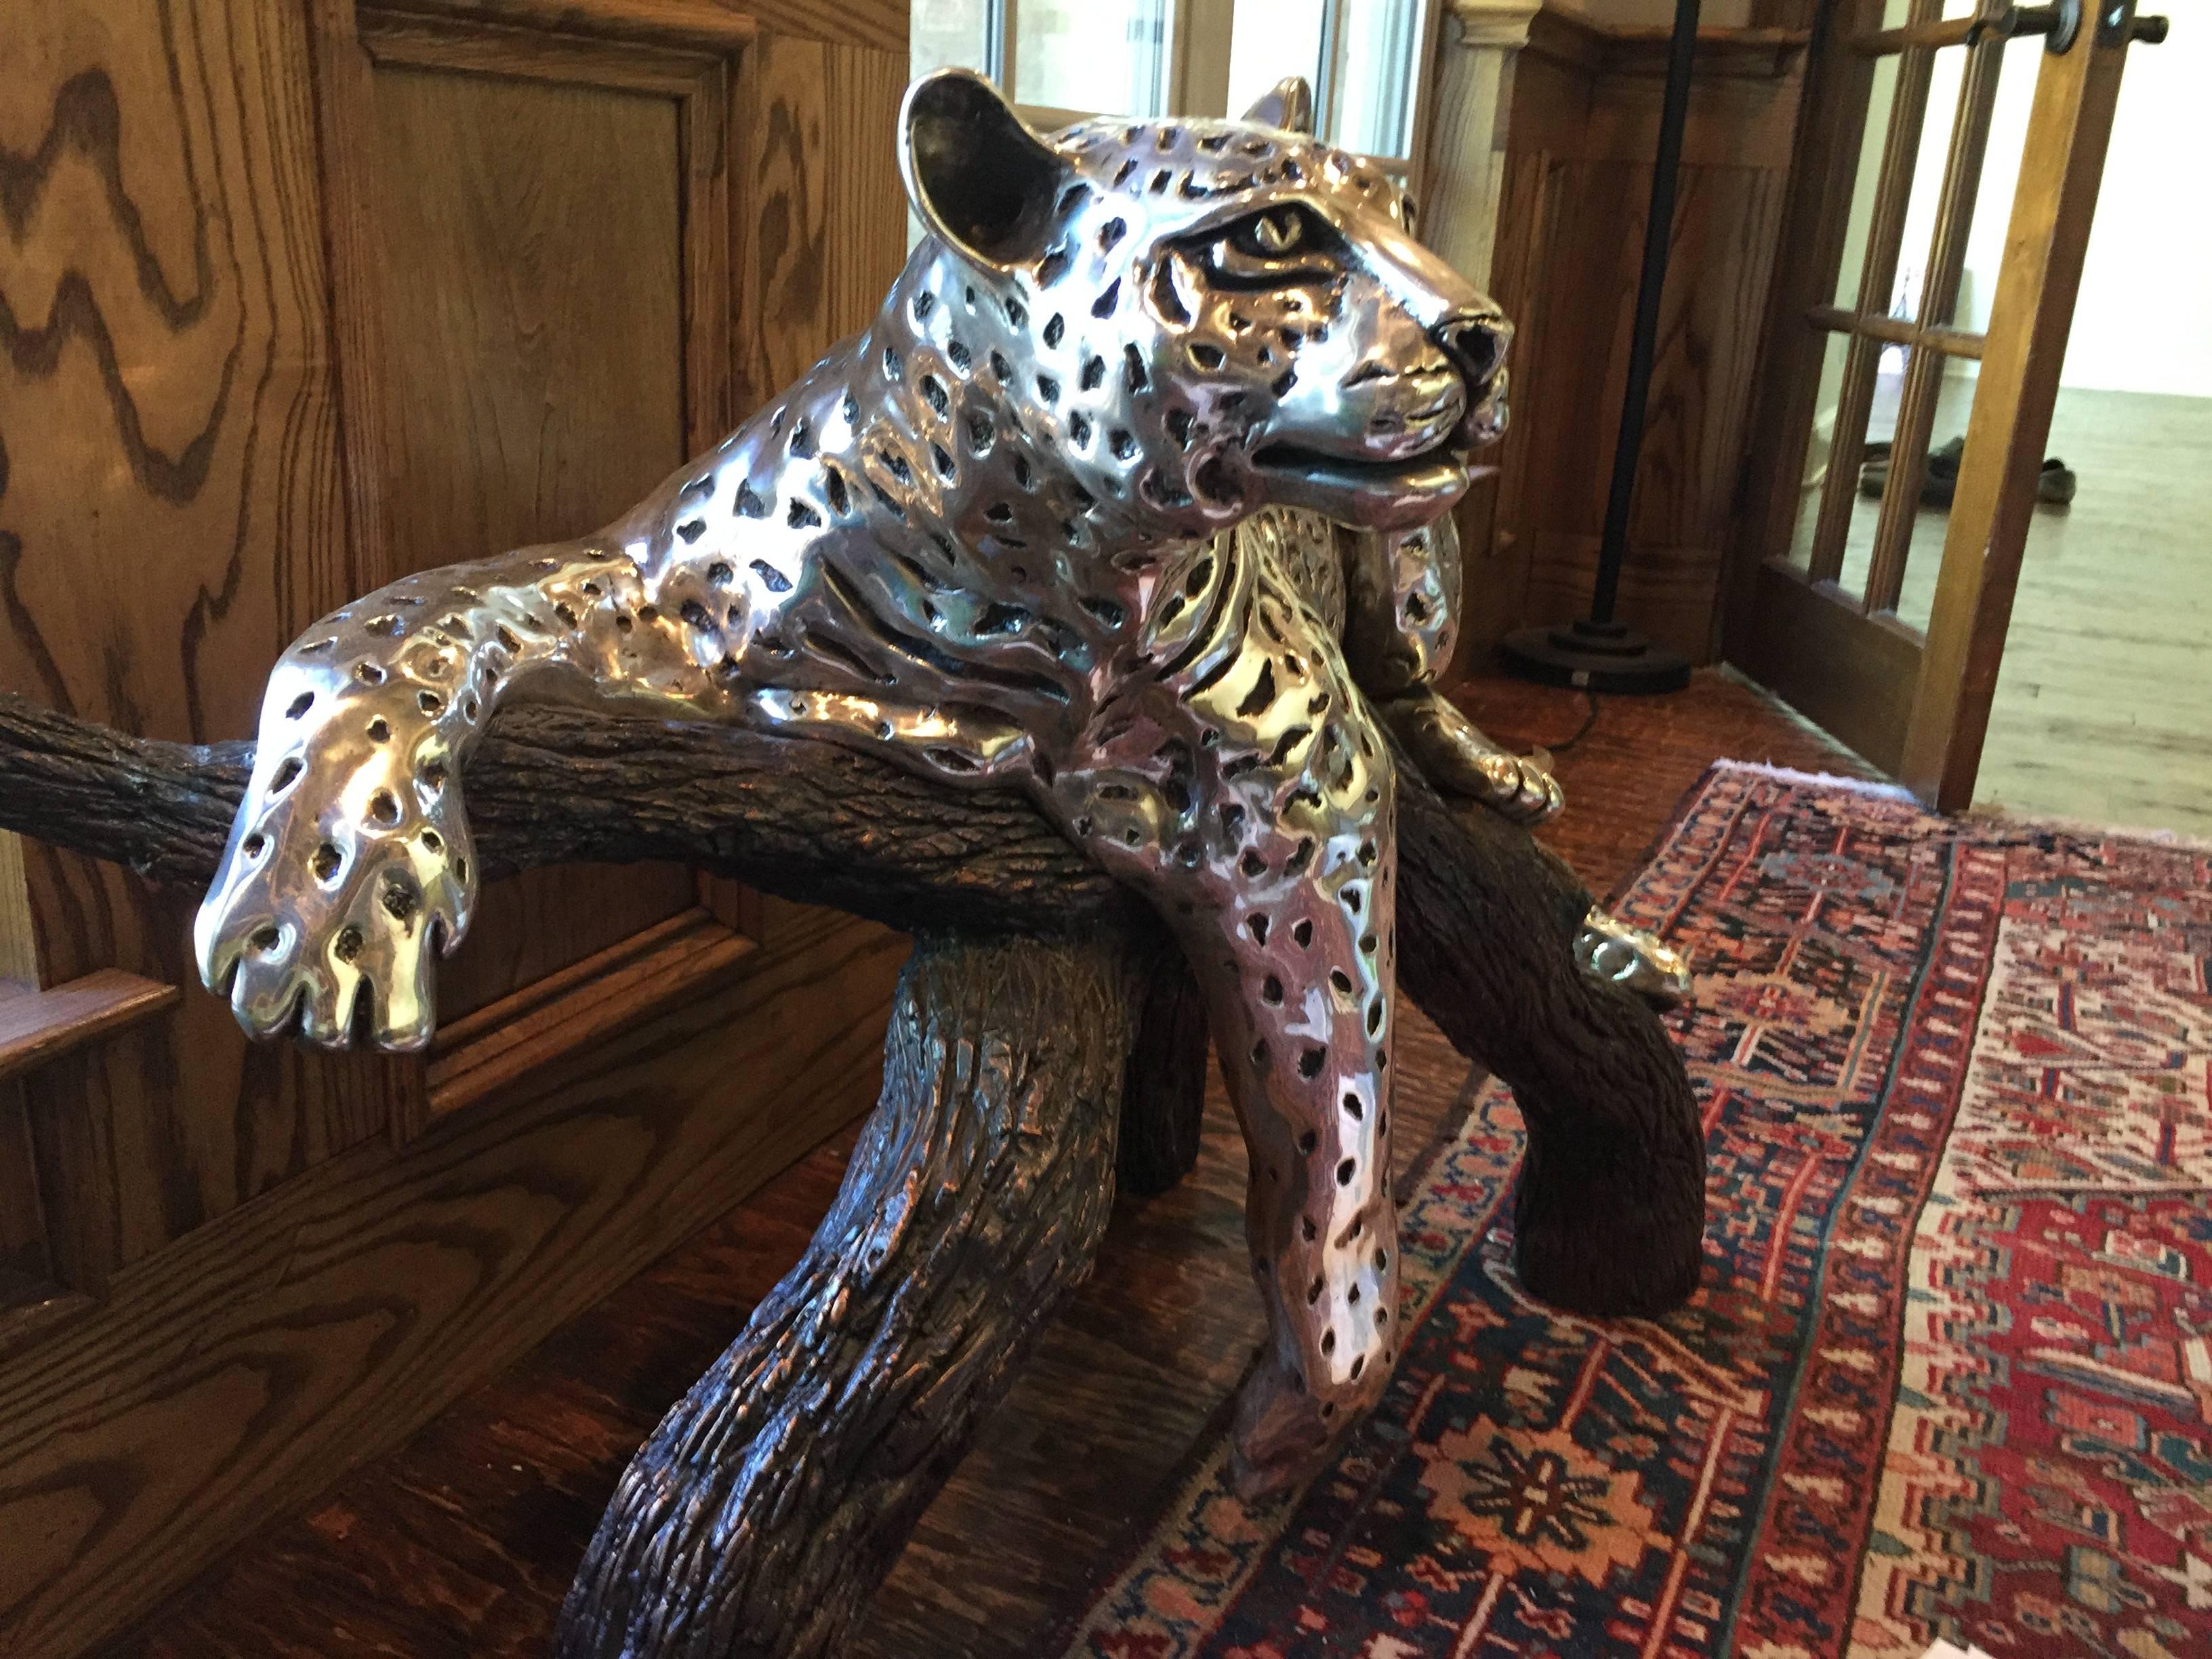 Silver plated leopard reclining on a branch by D’argenta. This exquisite limited edition sculpture by artist Ricardo Del Rio is produced by D’argenta. This sculpture beautifully captures the pensive look of a panther as it observes its surroundings